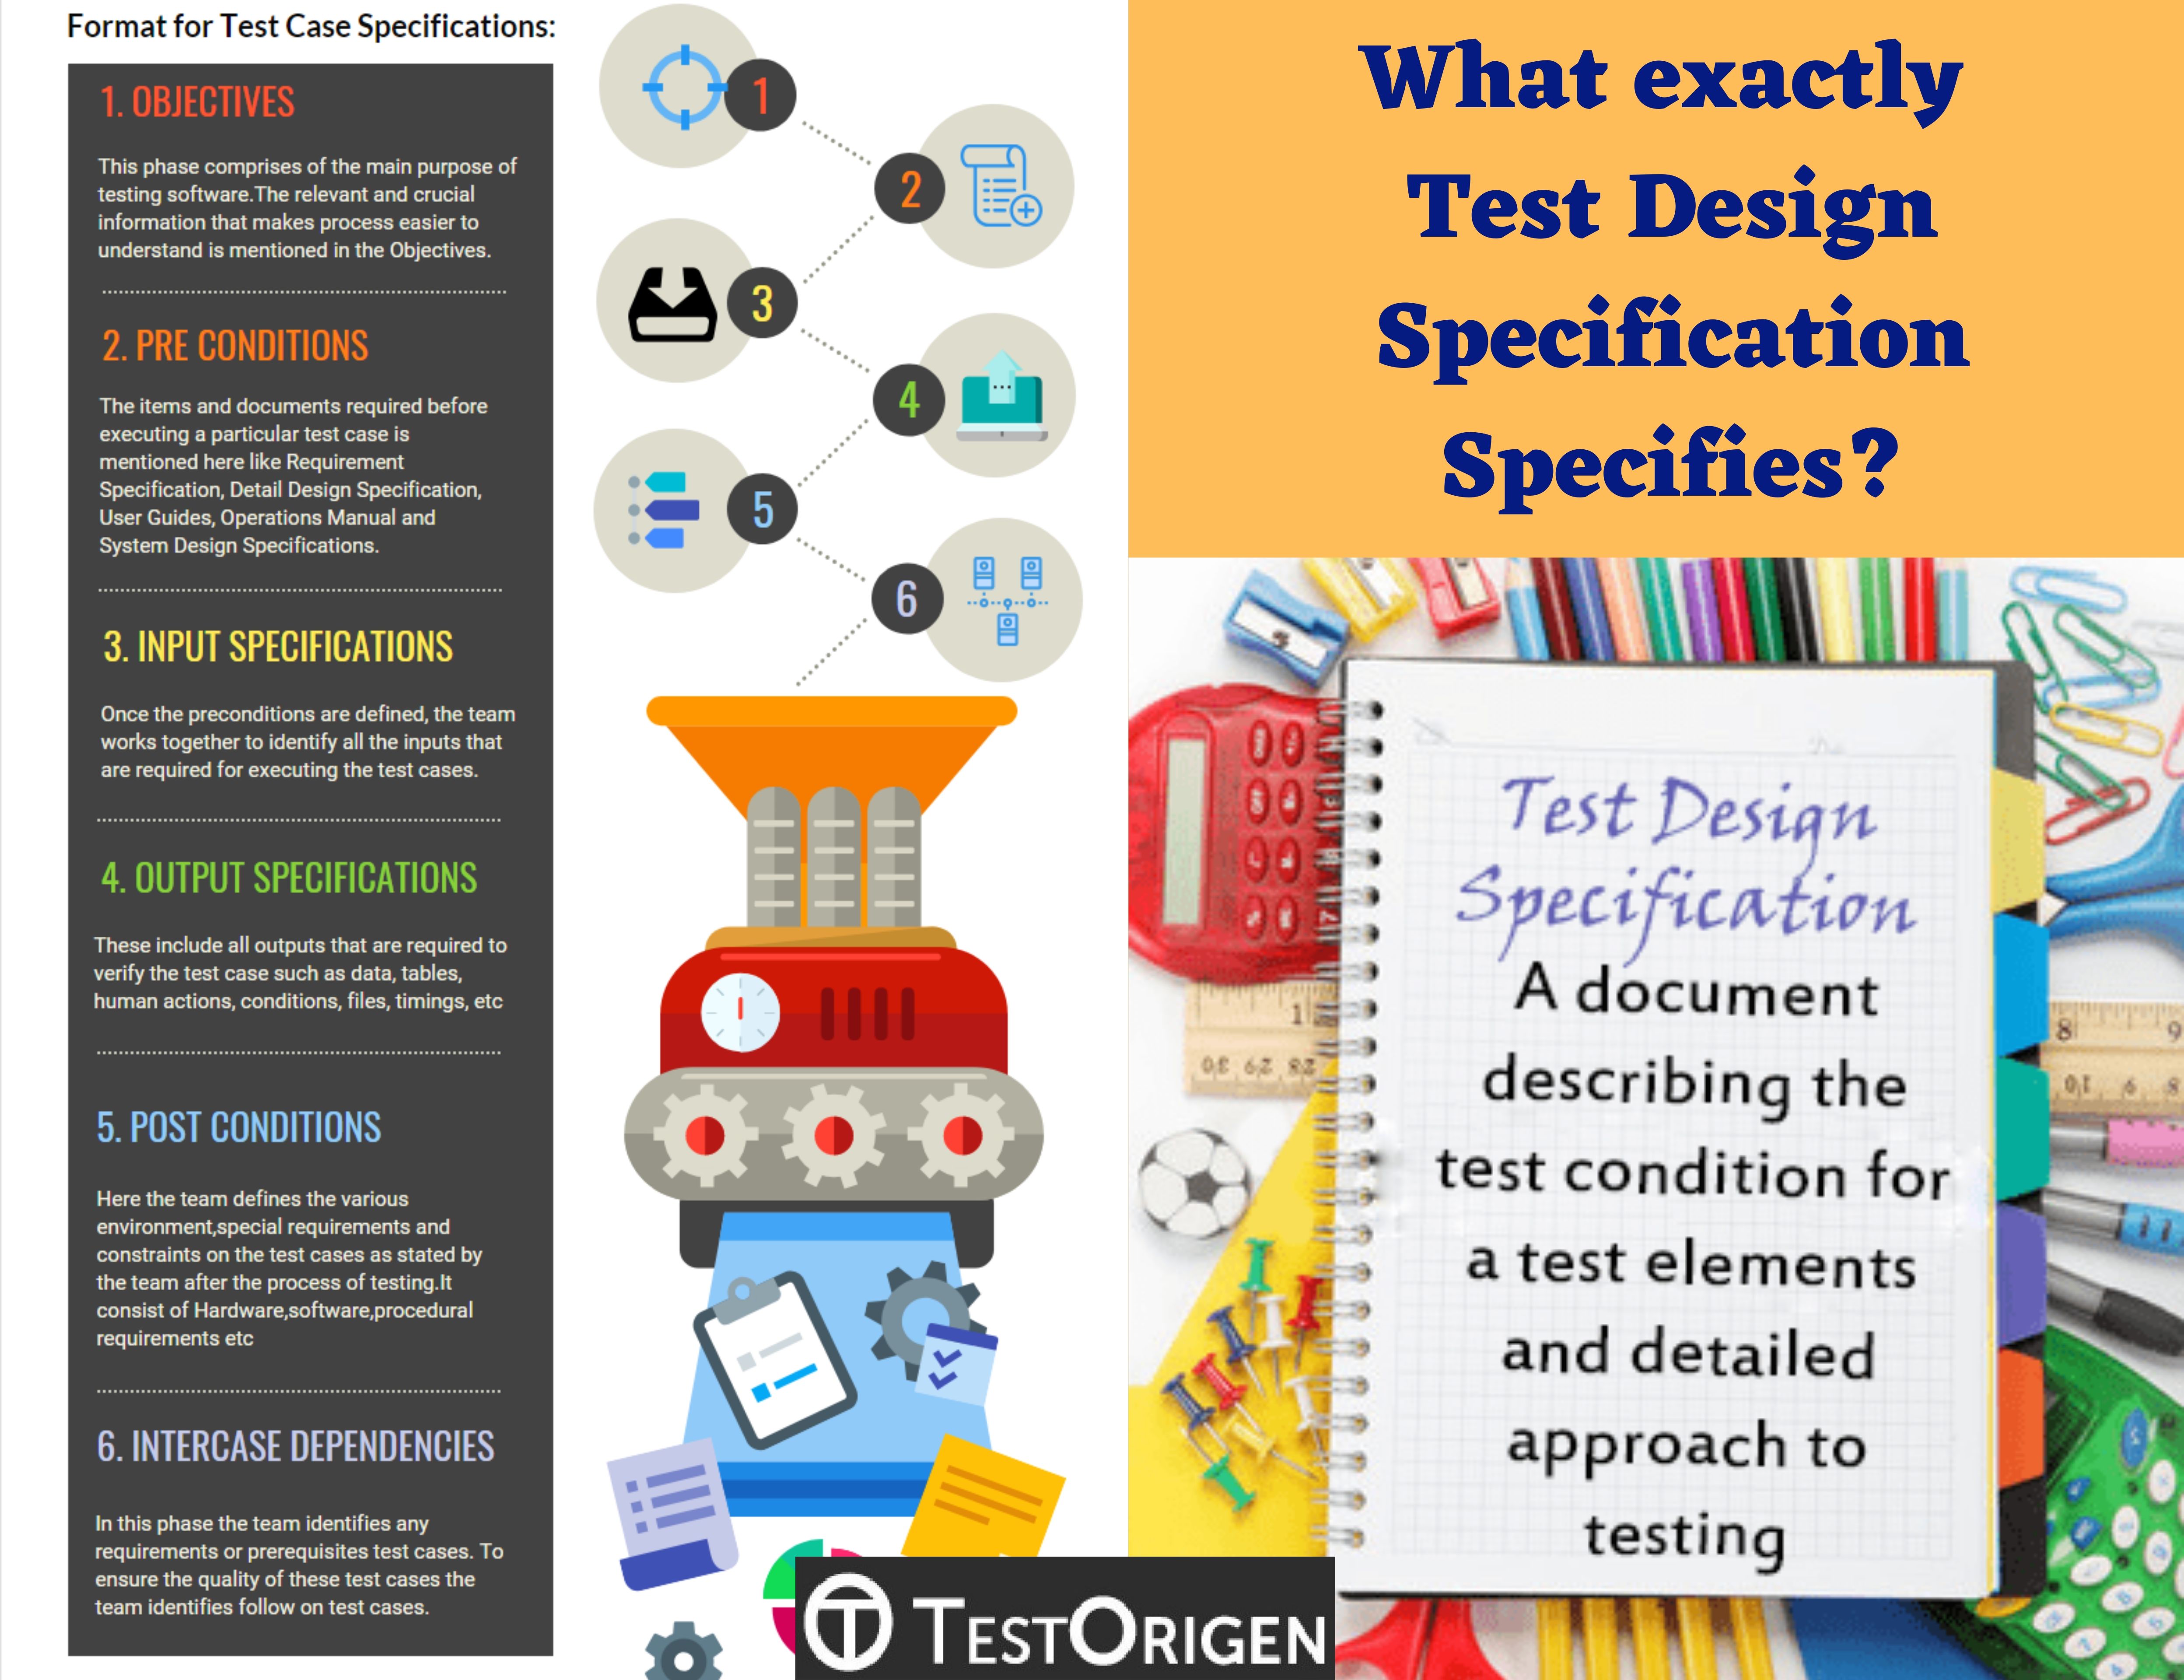 What exactly Test Design Specification Specifies?